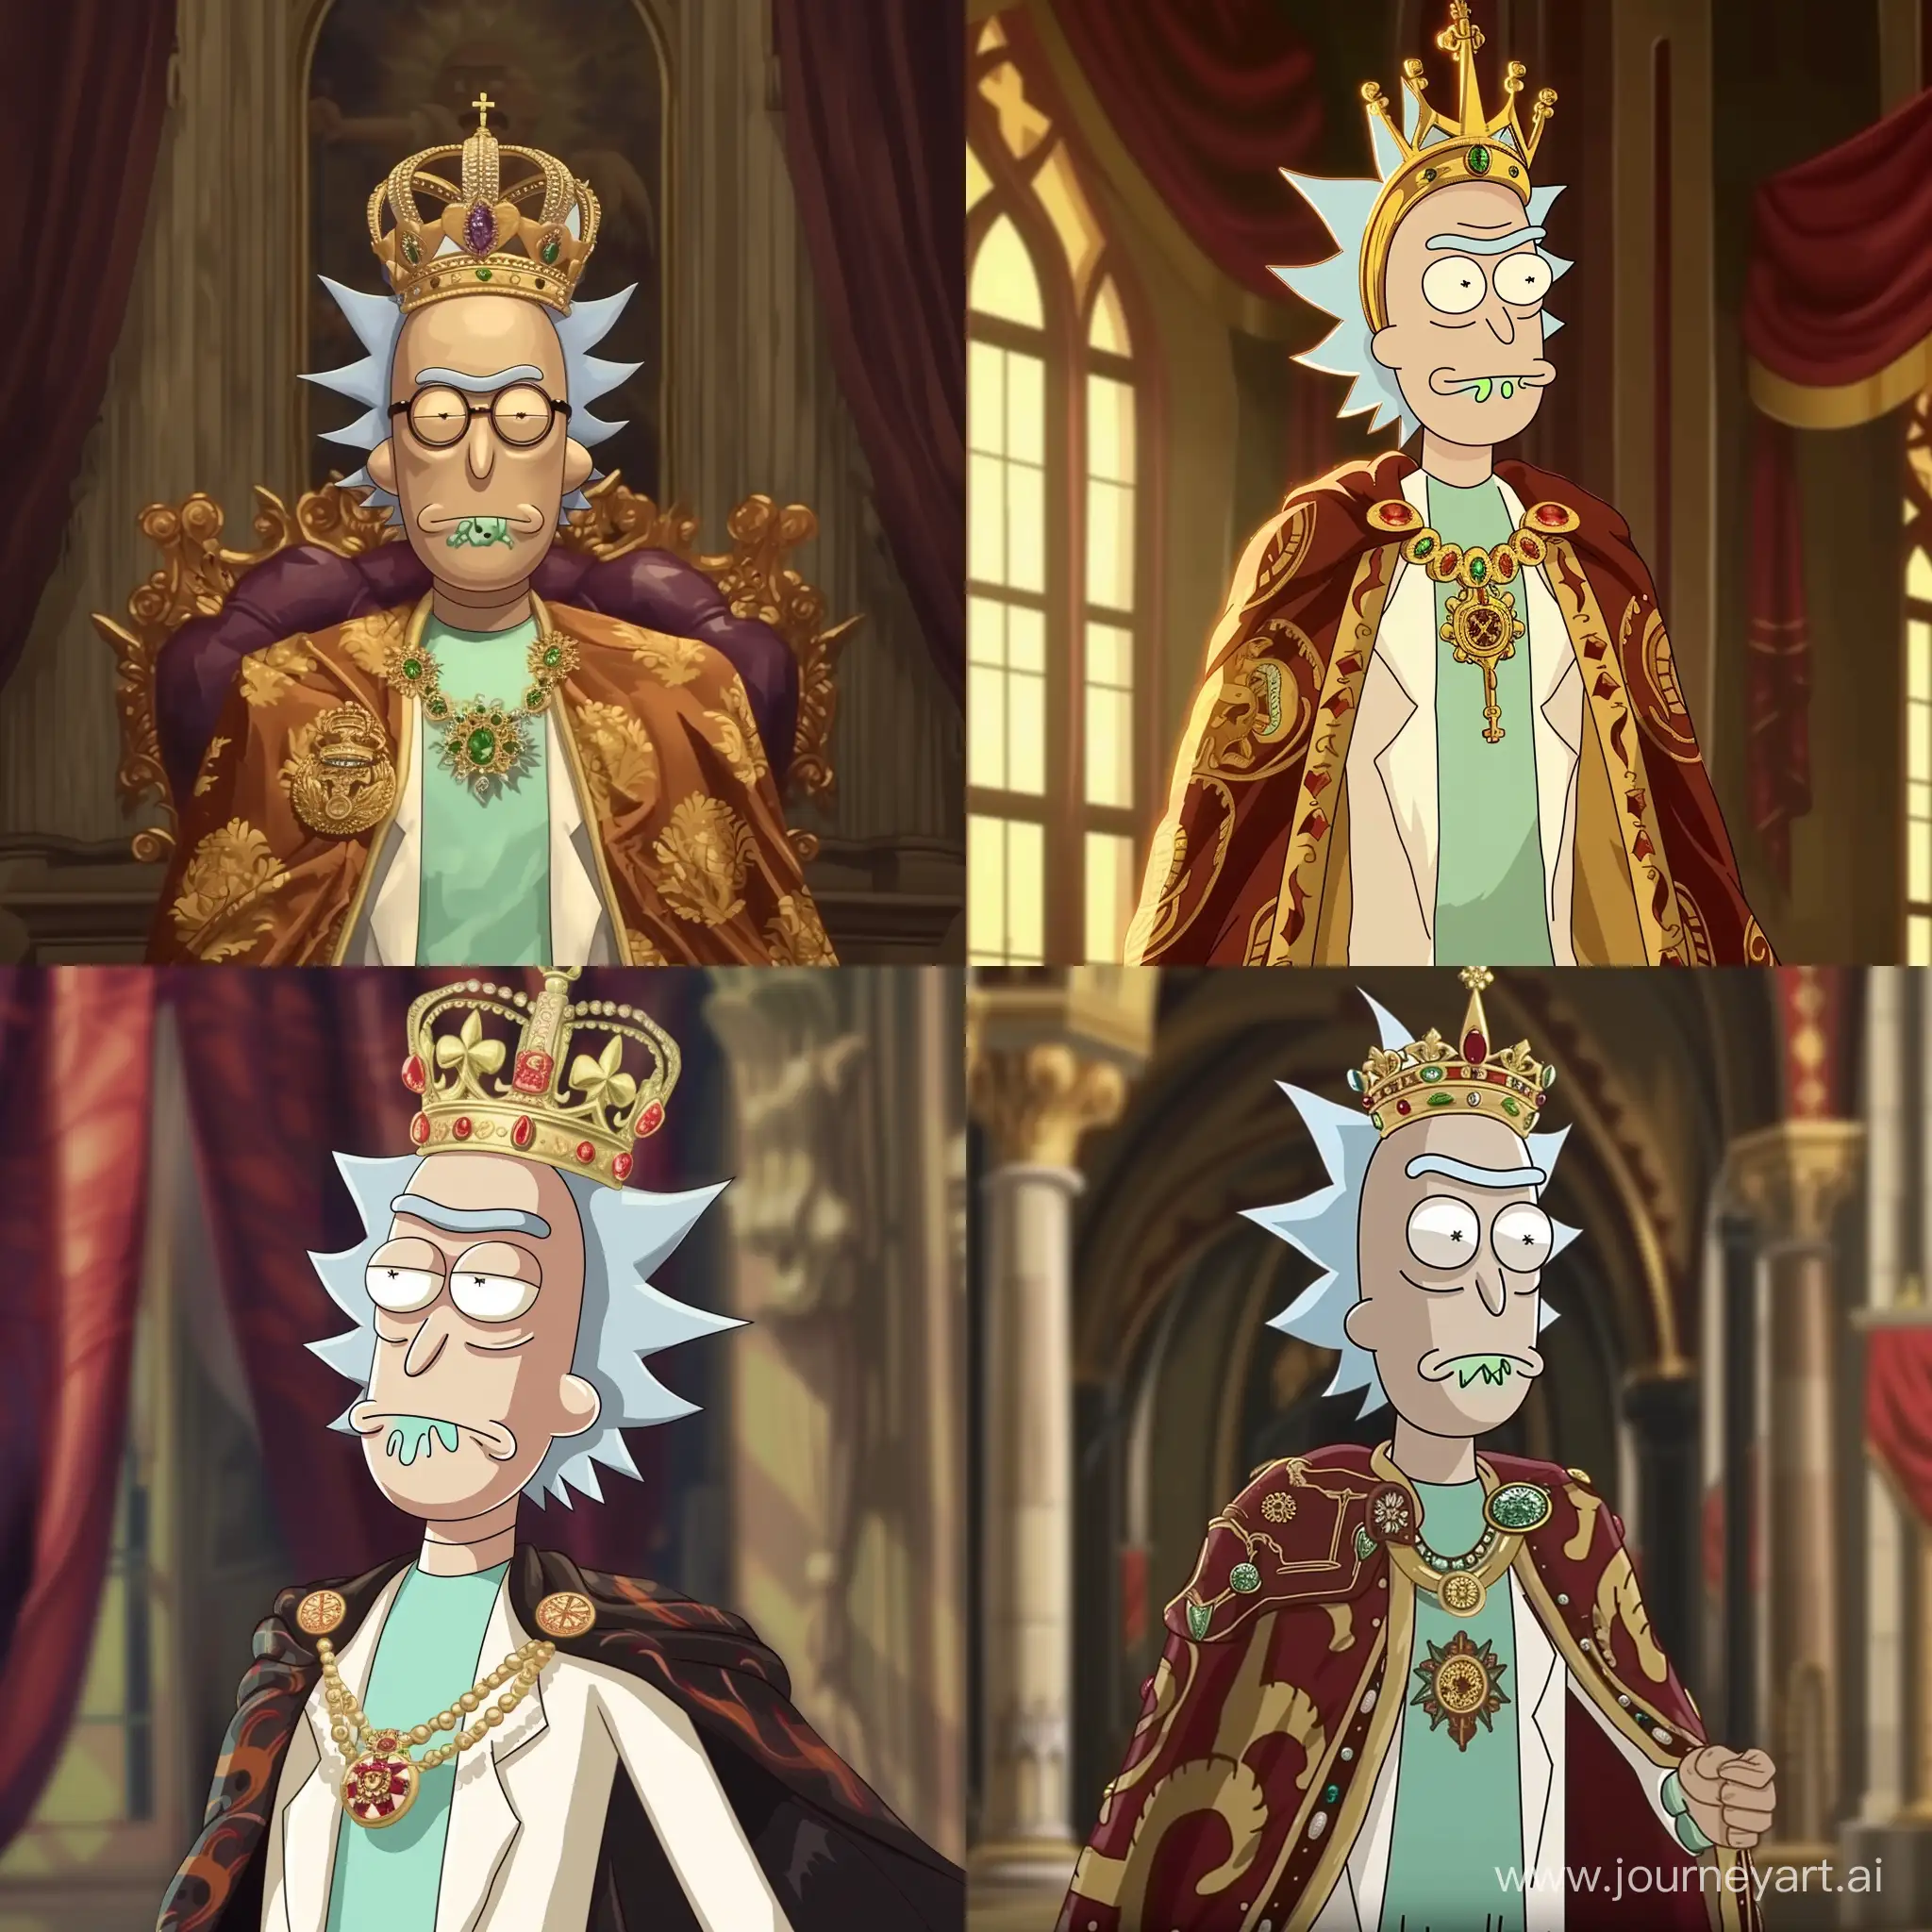 Rick-from-Rick-and-Morty-Dressed-as-Royalty